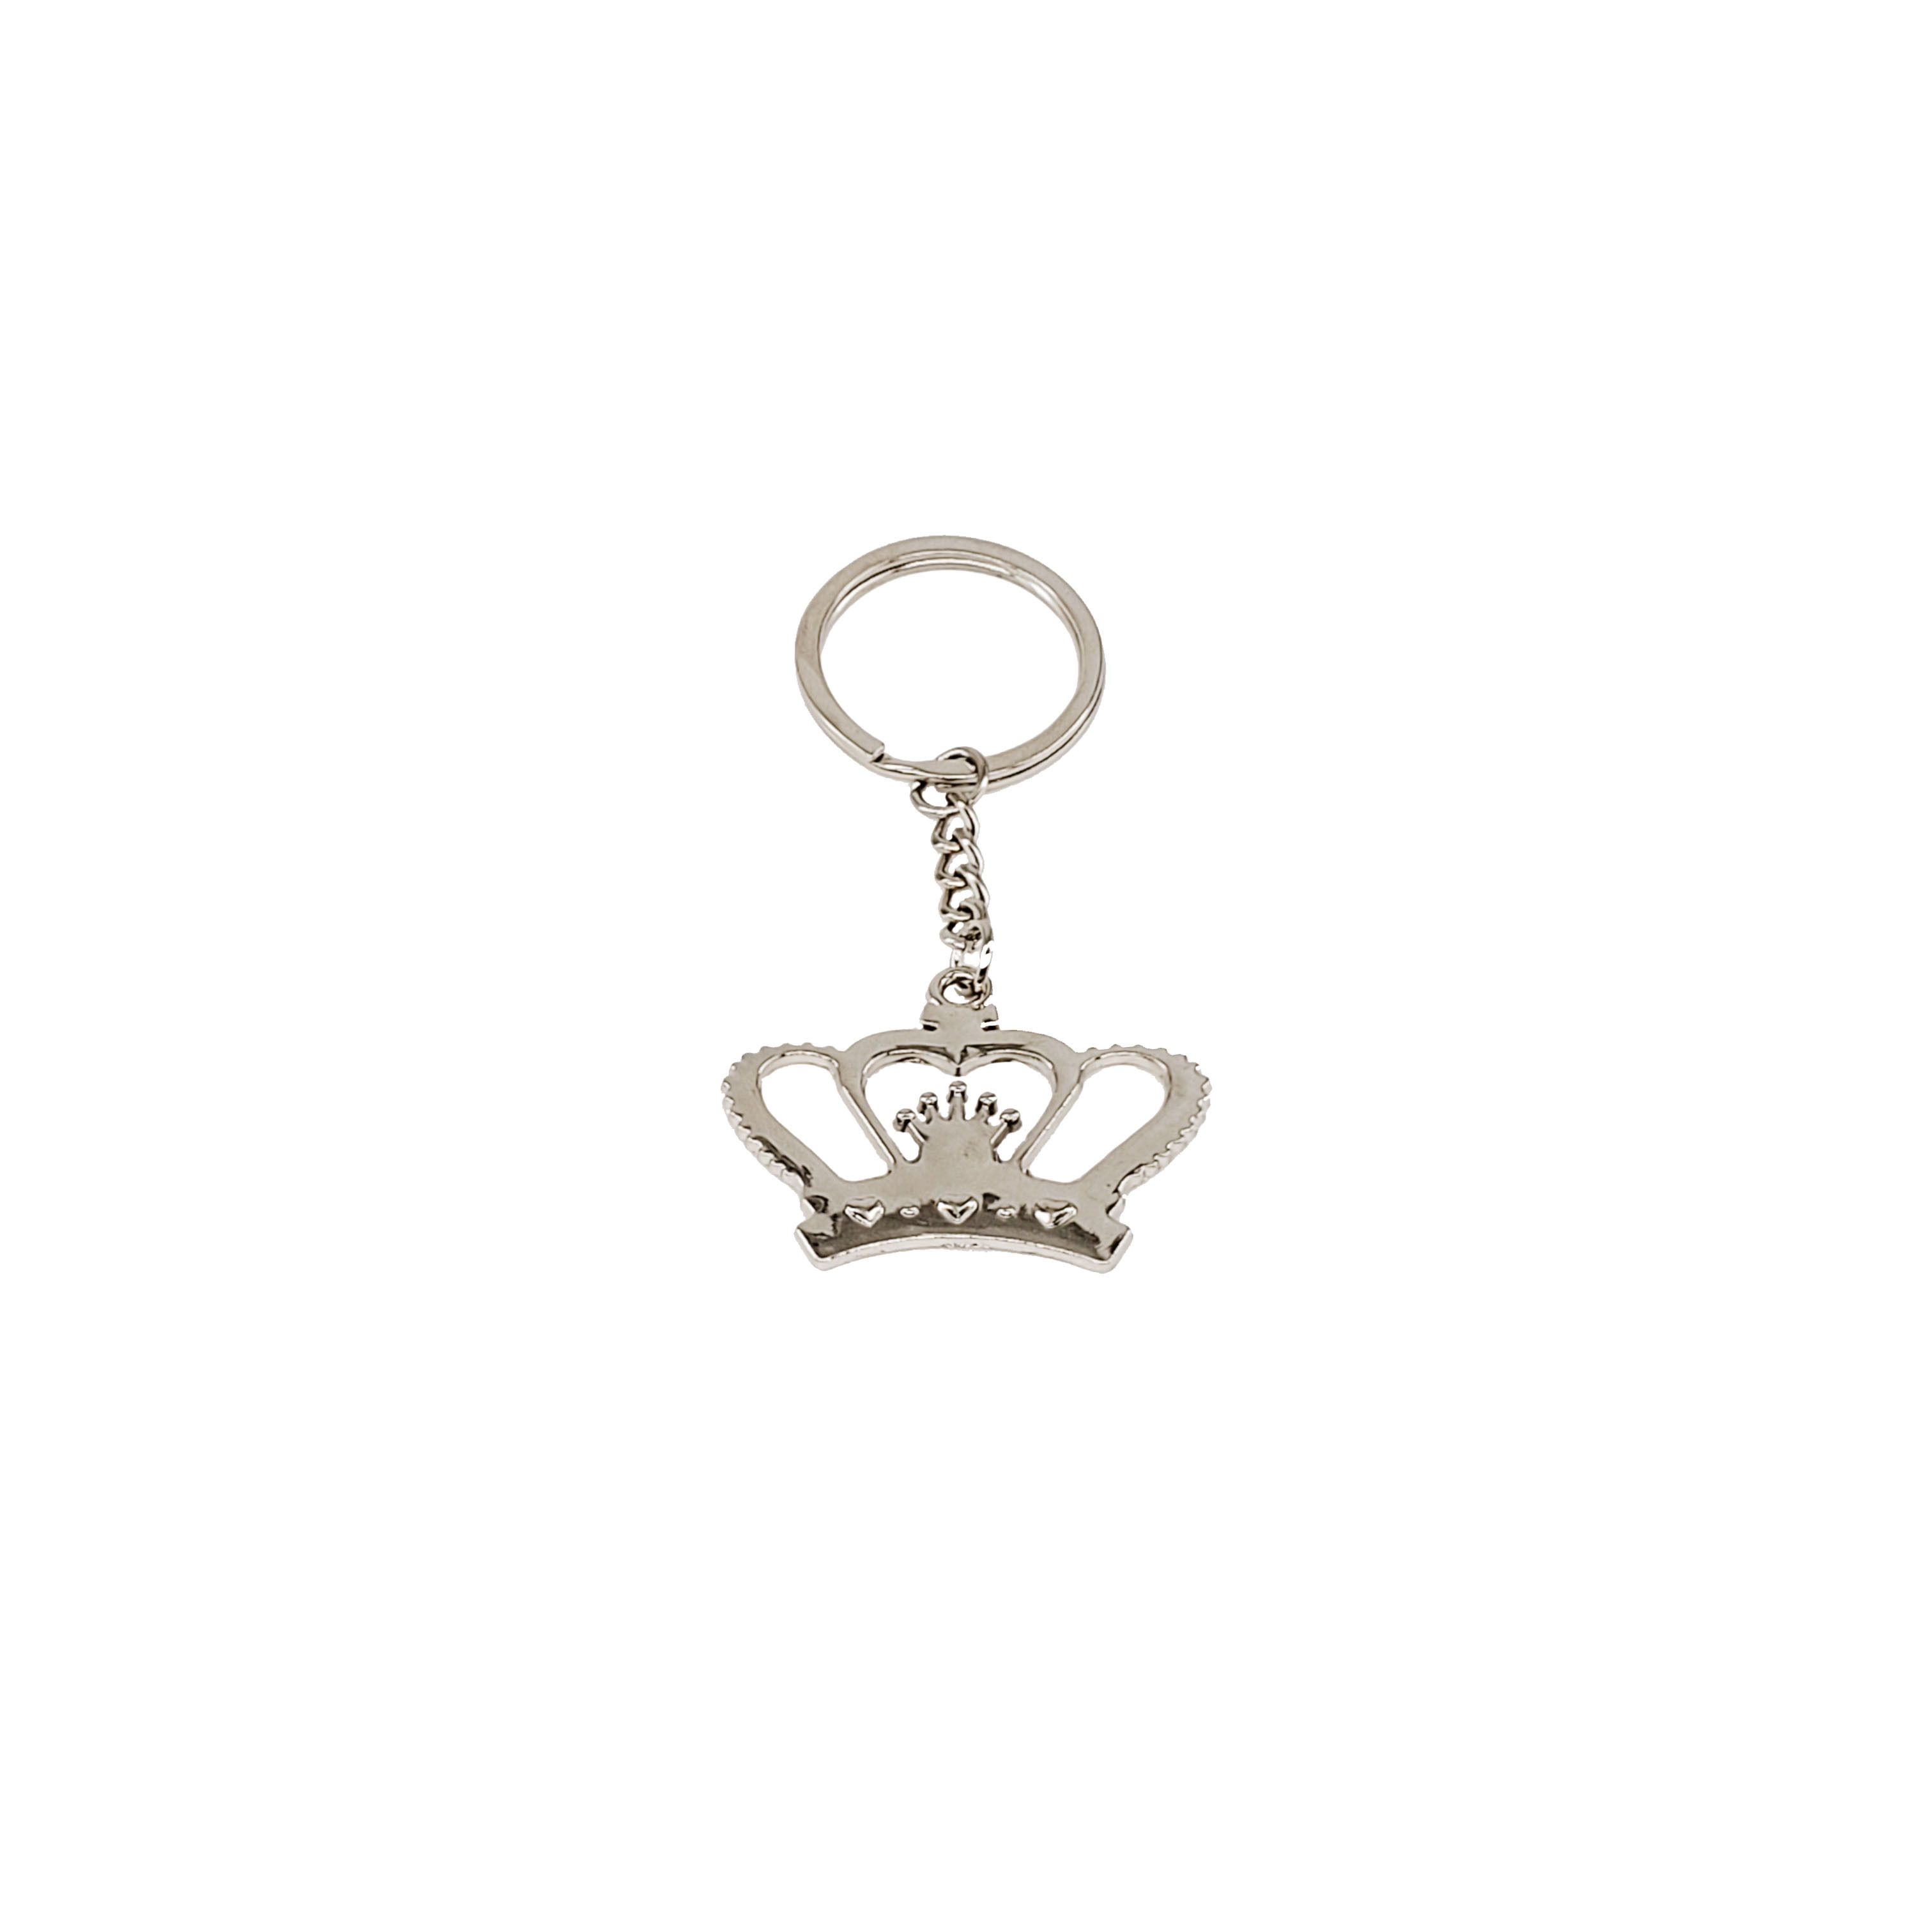 

12pcs Hollow Crown Princess Alloy Keychain, Shower Birthday Party Favors For Friend, Decoration For Key And Bag